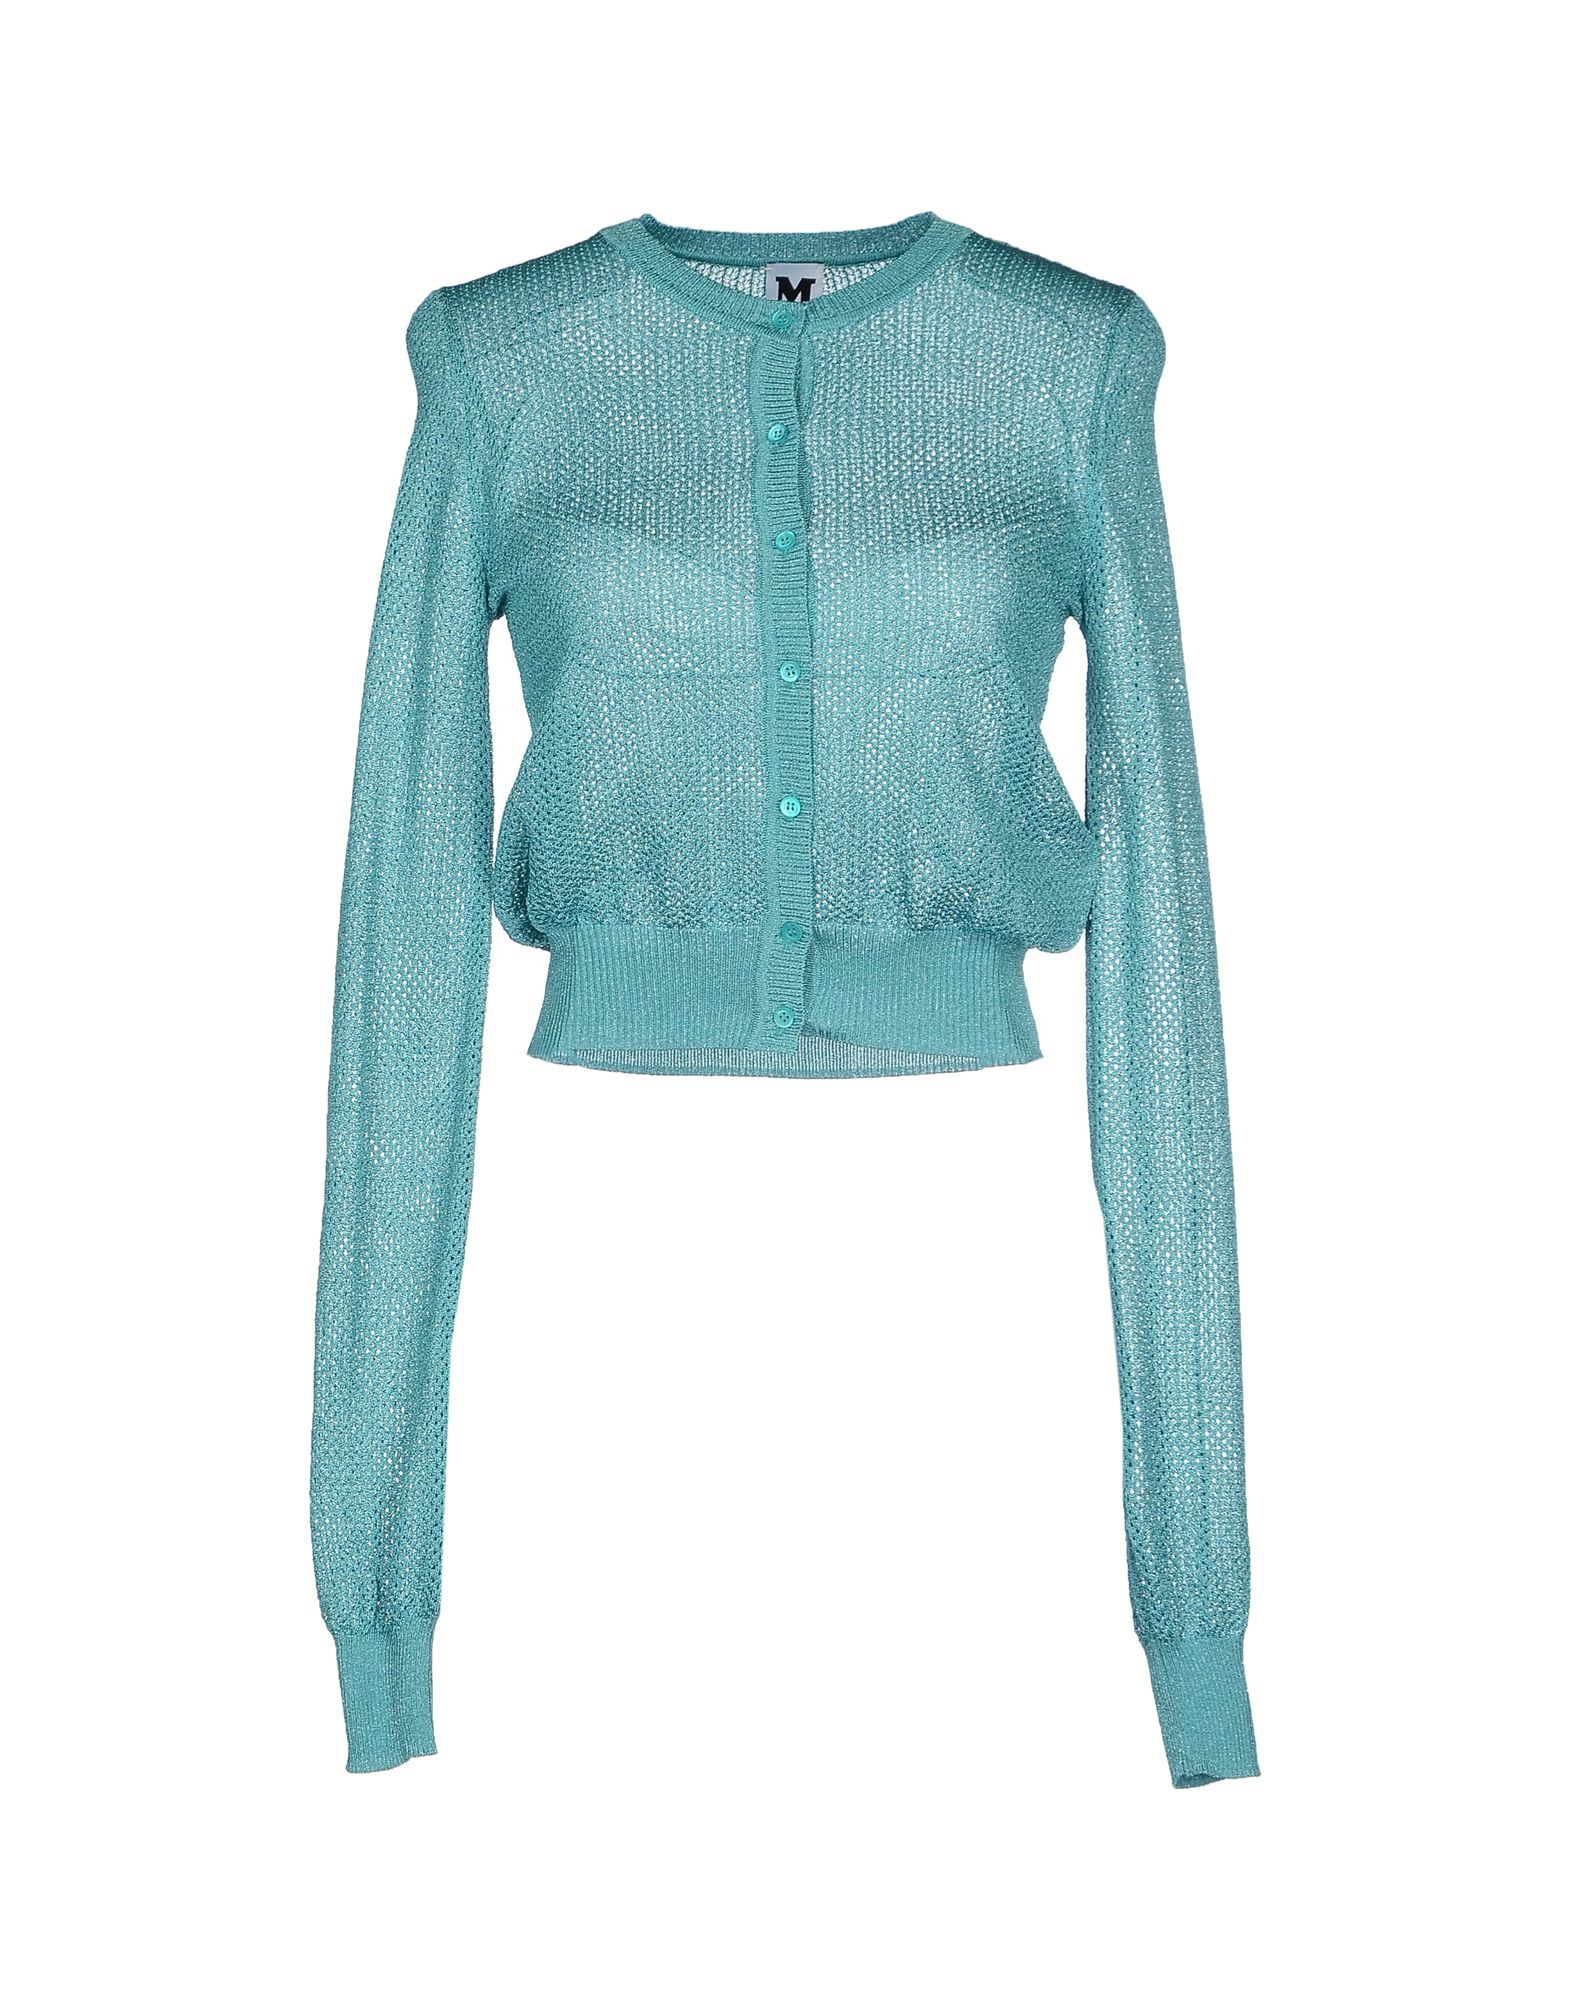 M Missoni Synthetic Cardigan in Green - Lyst